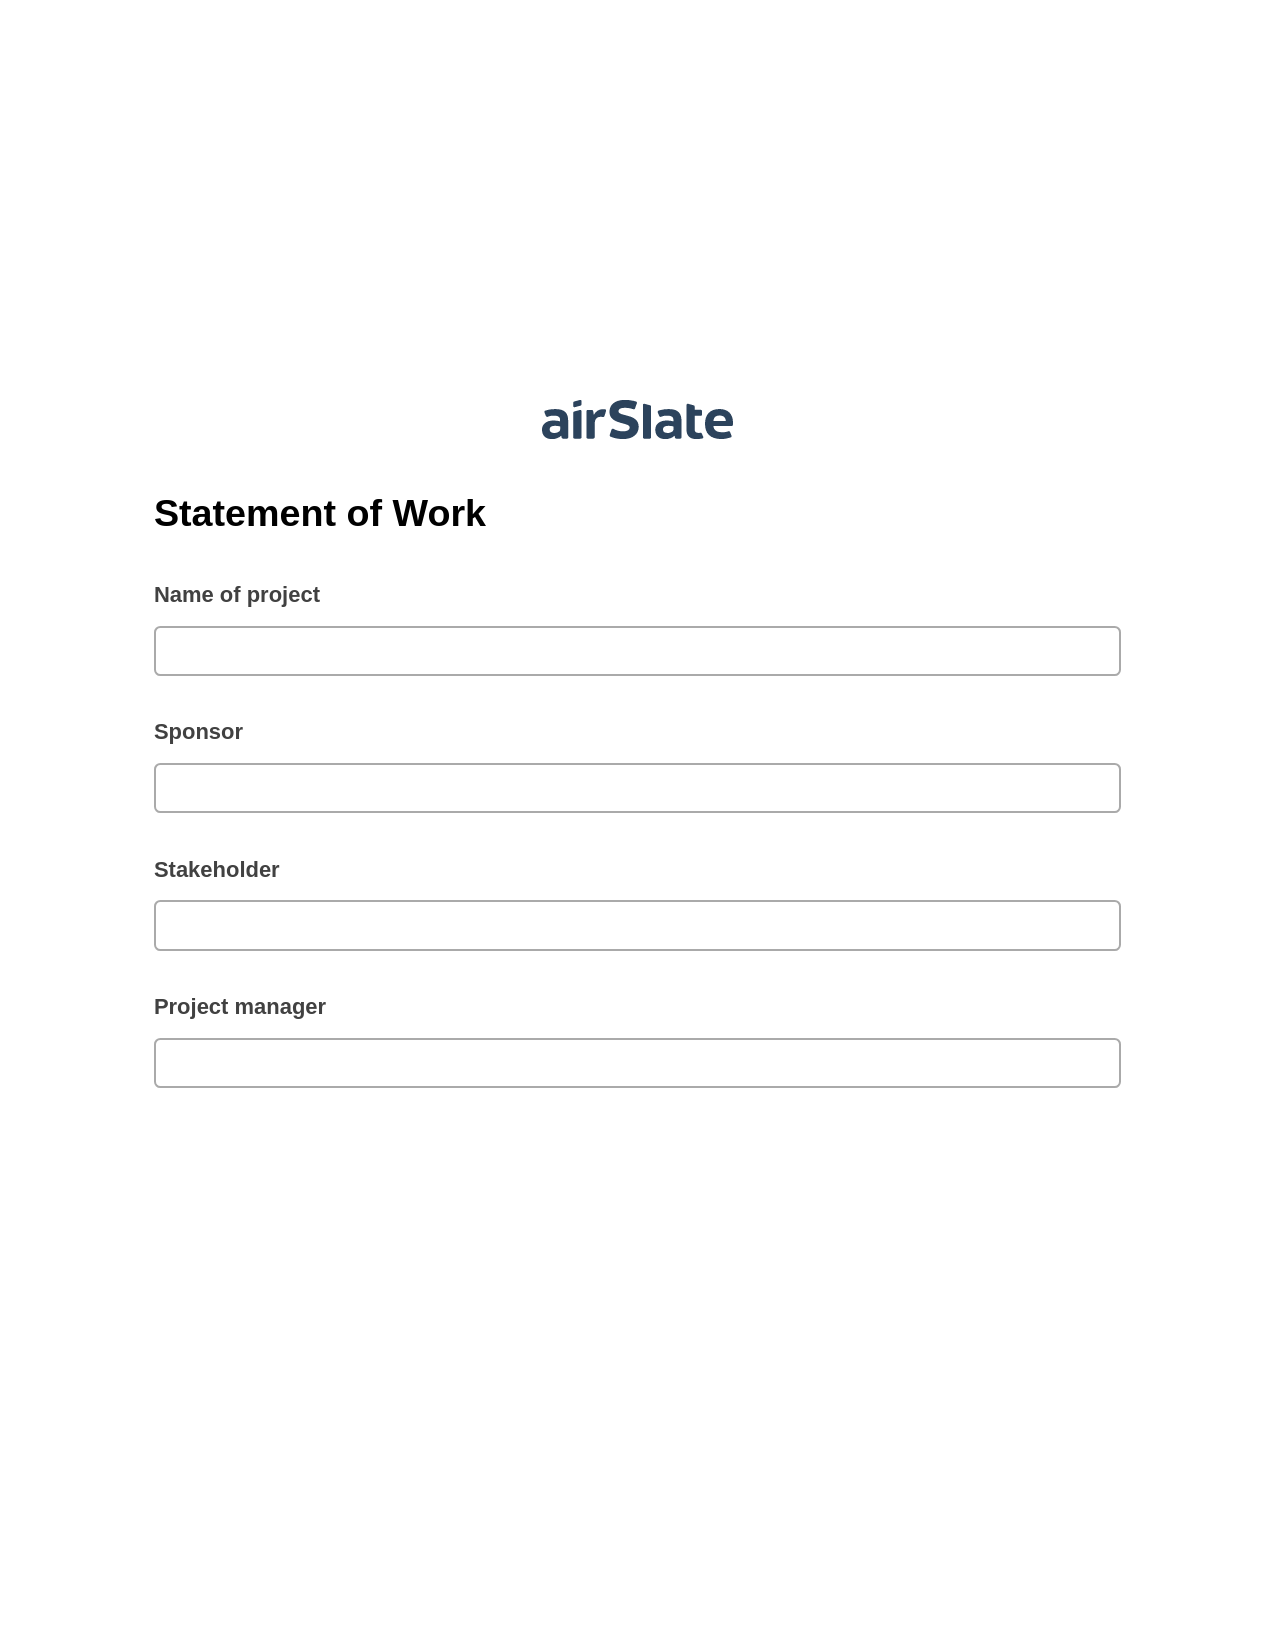 Statement of Work Pre-fill Document Bot, Add Tags to Slate Bot, Export to MySQL Bot